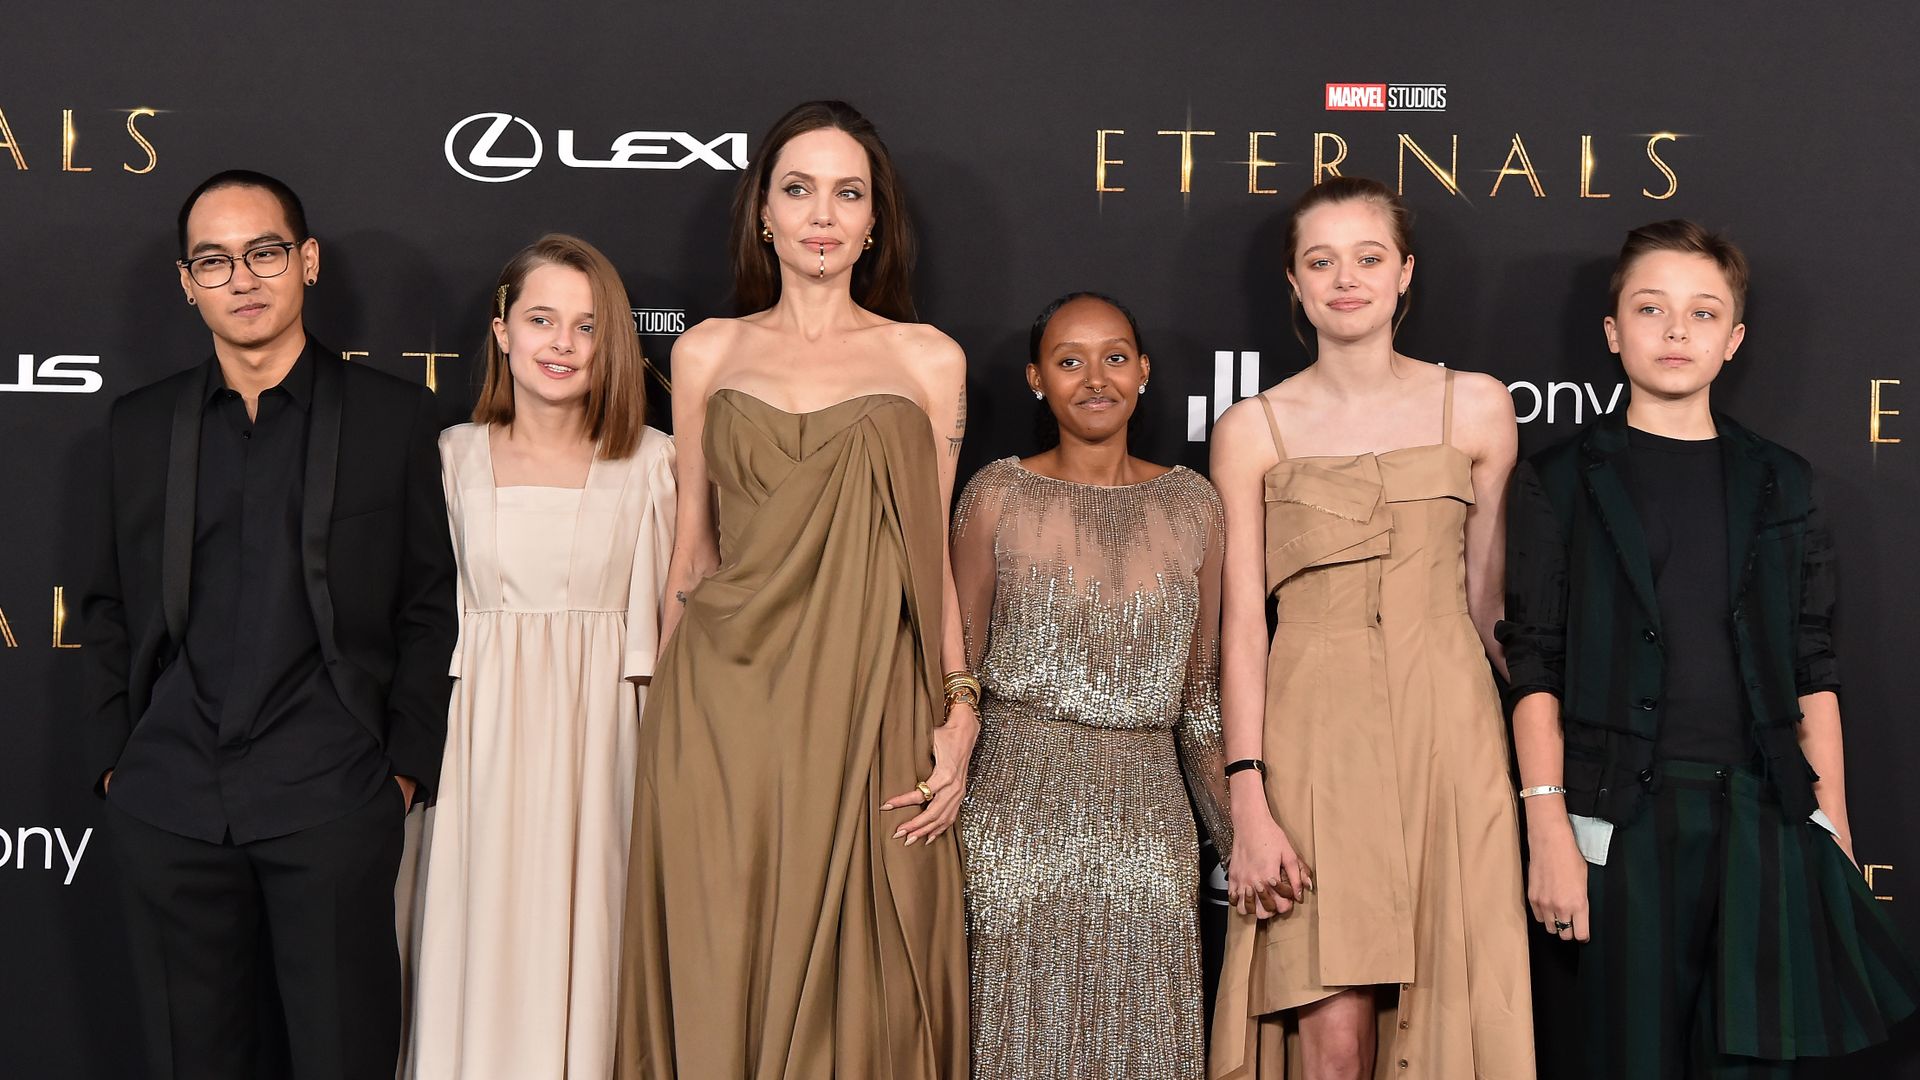 angelina jolie at premiere with five children